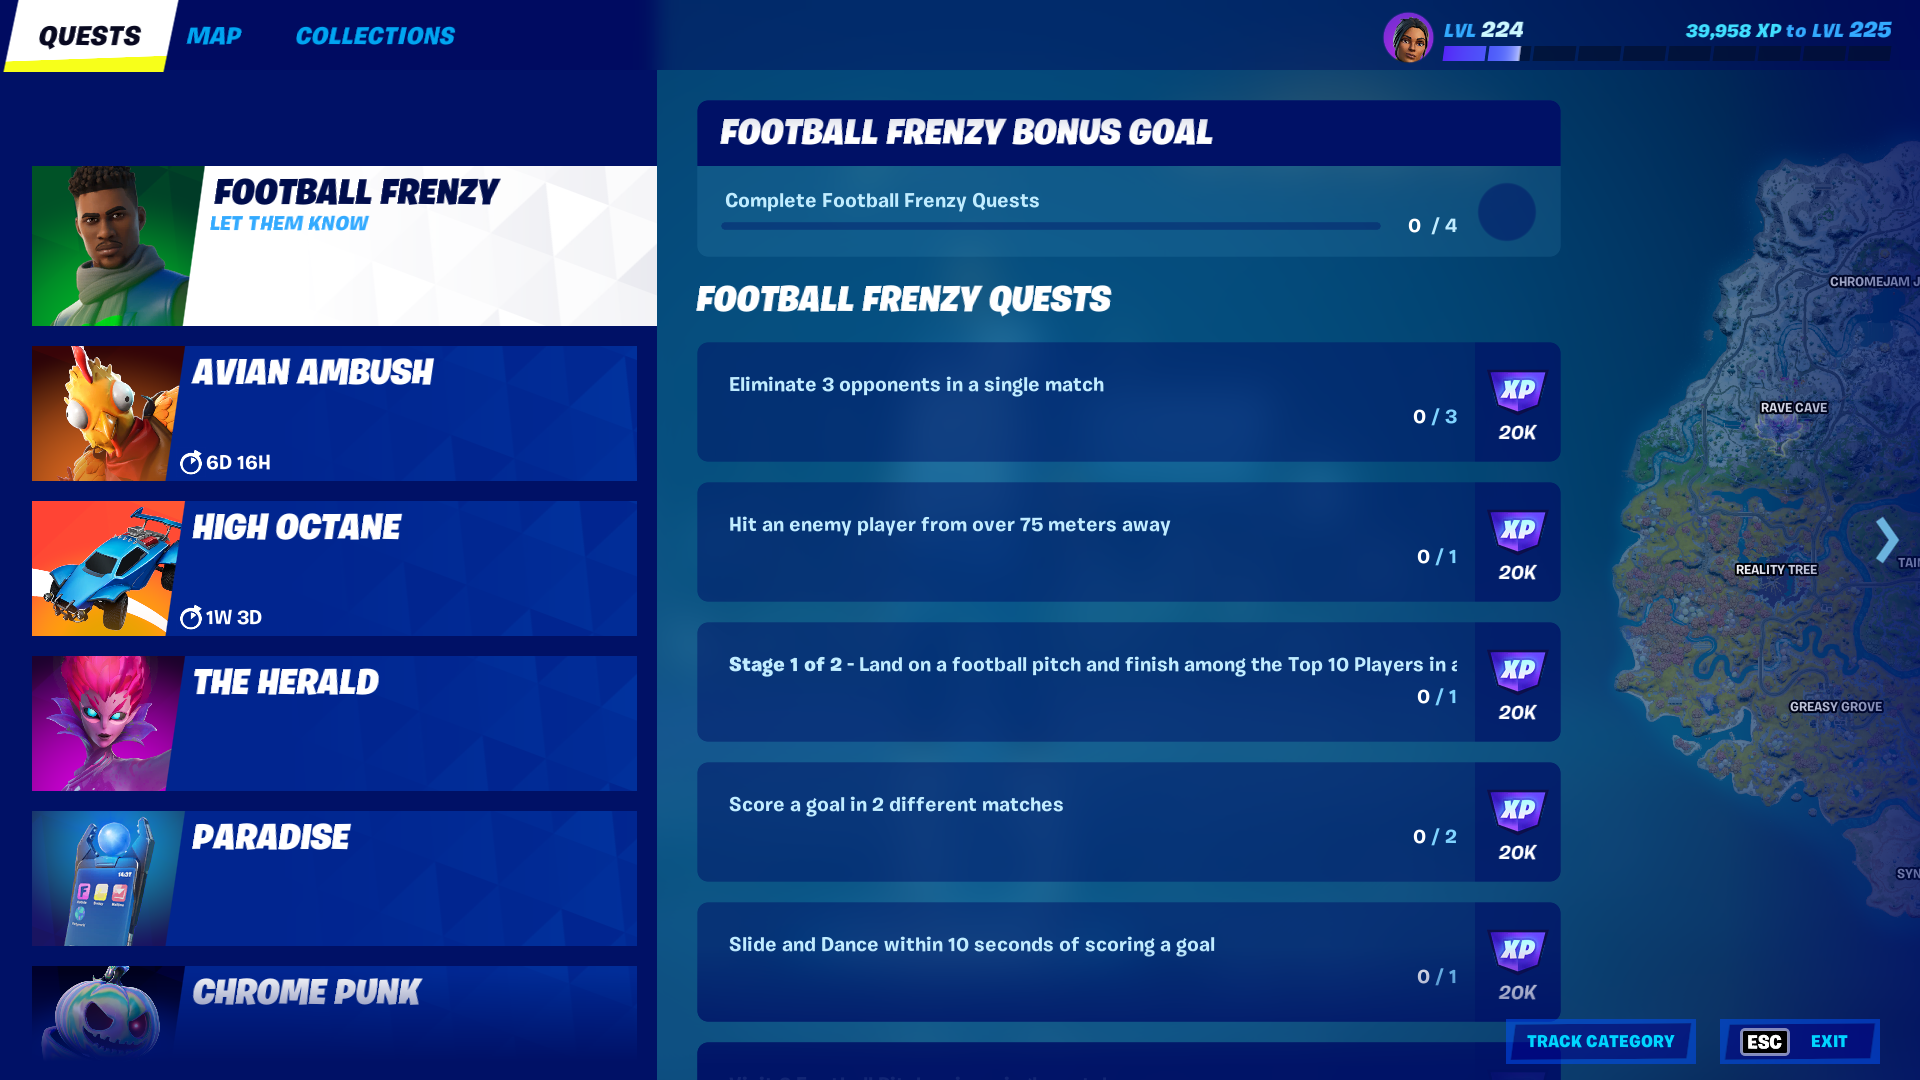 Football Frenzy Quests available now